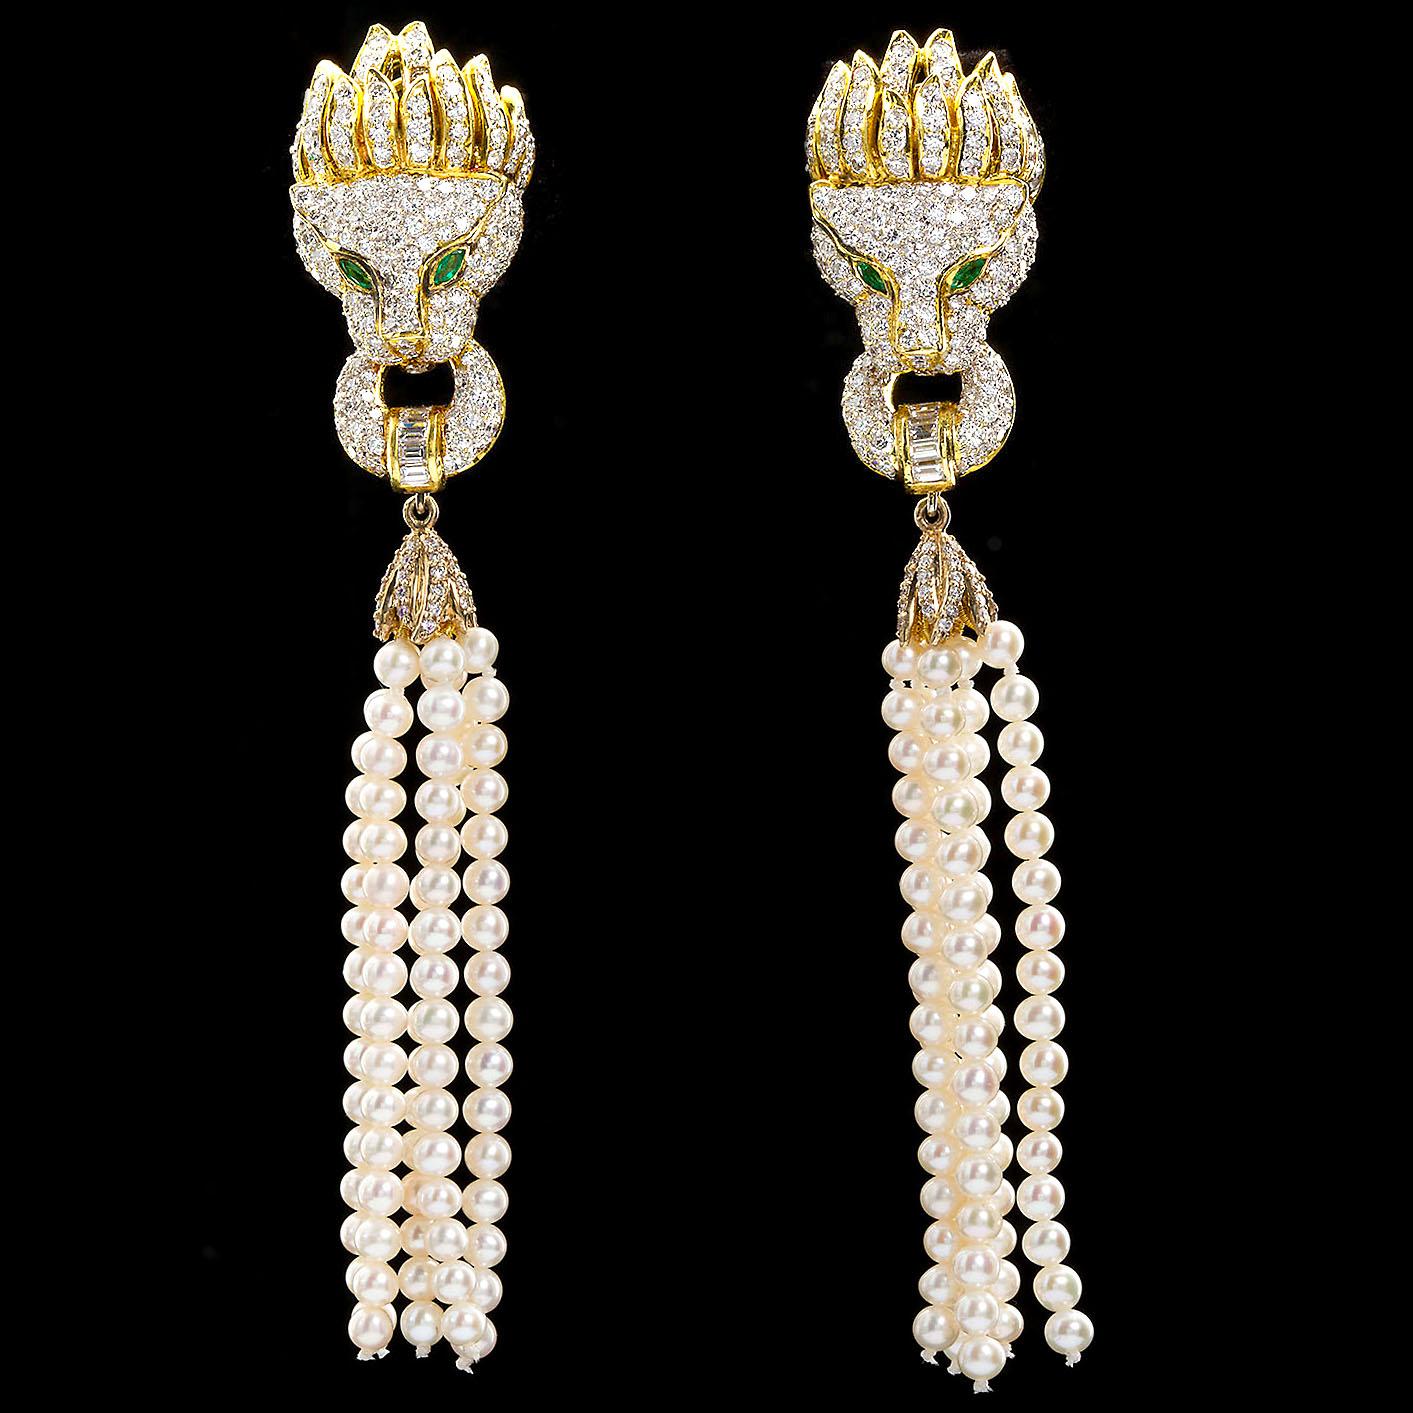 A fantastic pair of diamond pavé in 18 karat gold Lion head with diamond pavé mane and emerald eyes accent earrings. A pair of removable cultured pearl tassels take these critters to the next level. 

Diamond weight: approx. 8.00 ctw
Emerald weight: